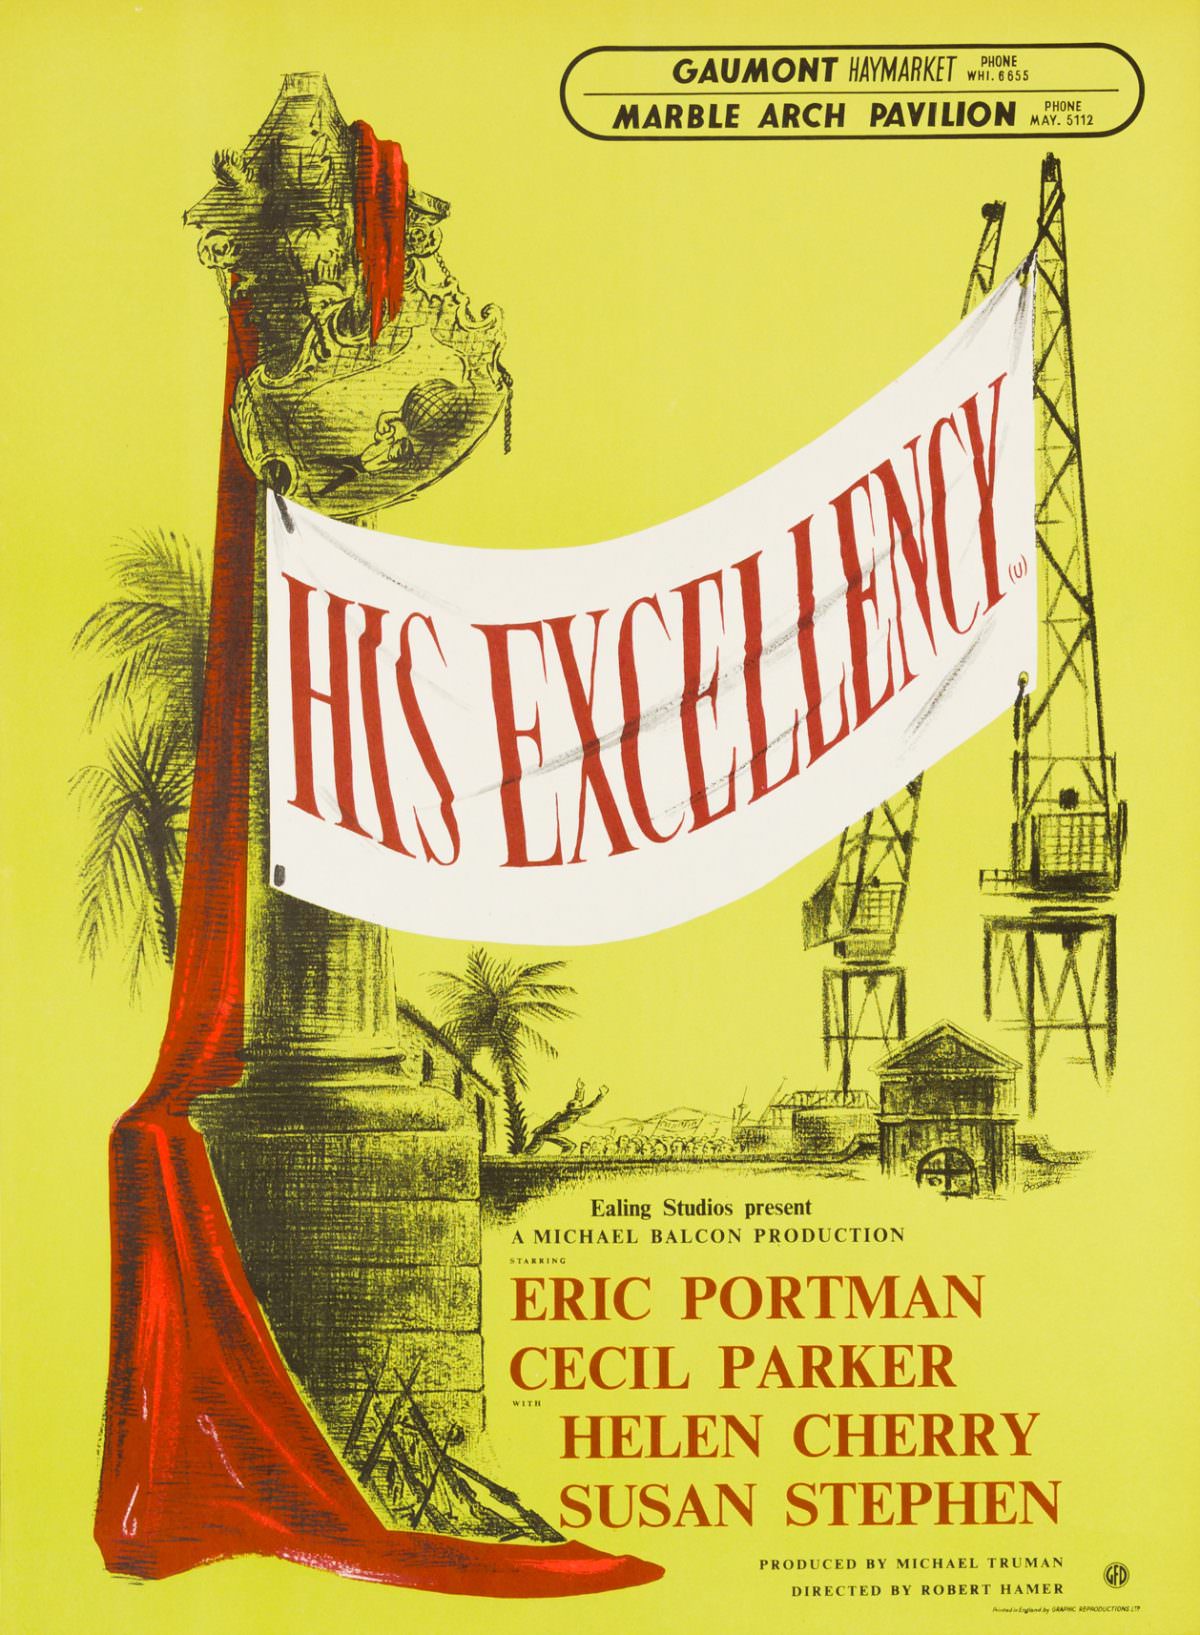 His Excellency is a 1952 British comedy drama film directed by Robert Hamer and starring Eric Portman, Cecil Parker, Helen Cherry and Susan Stephen.